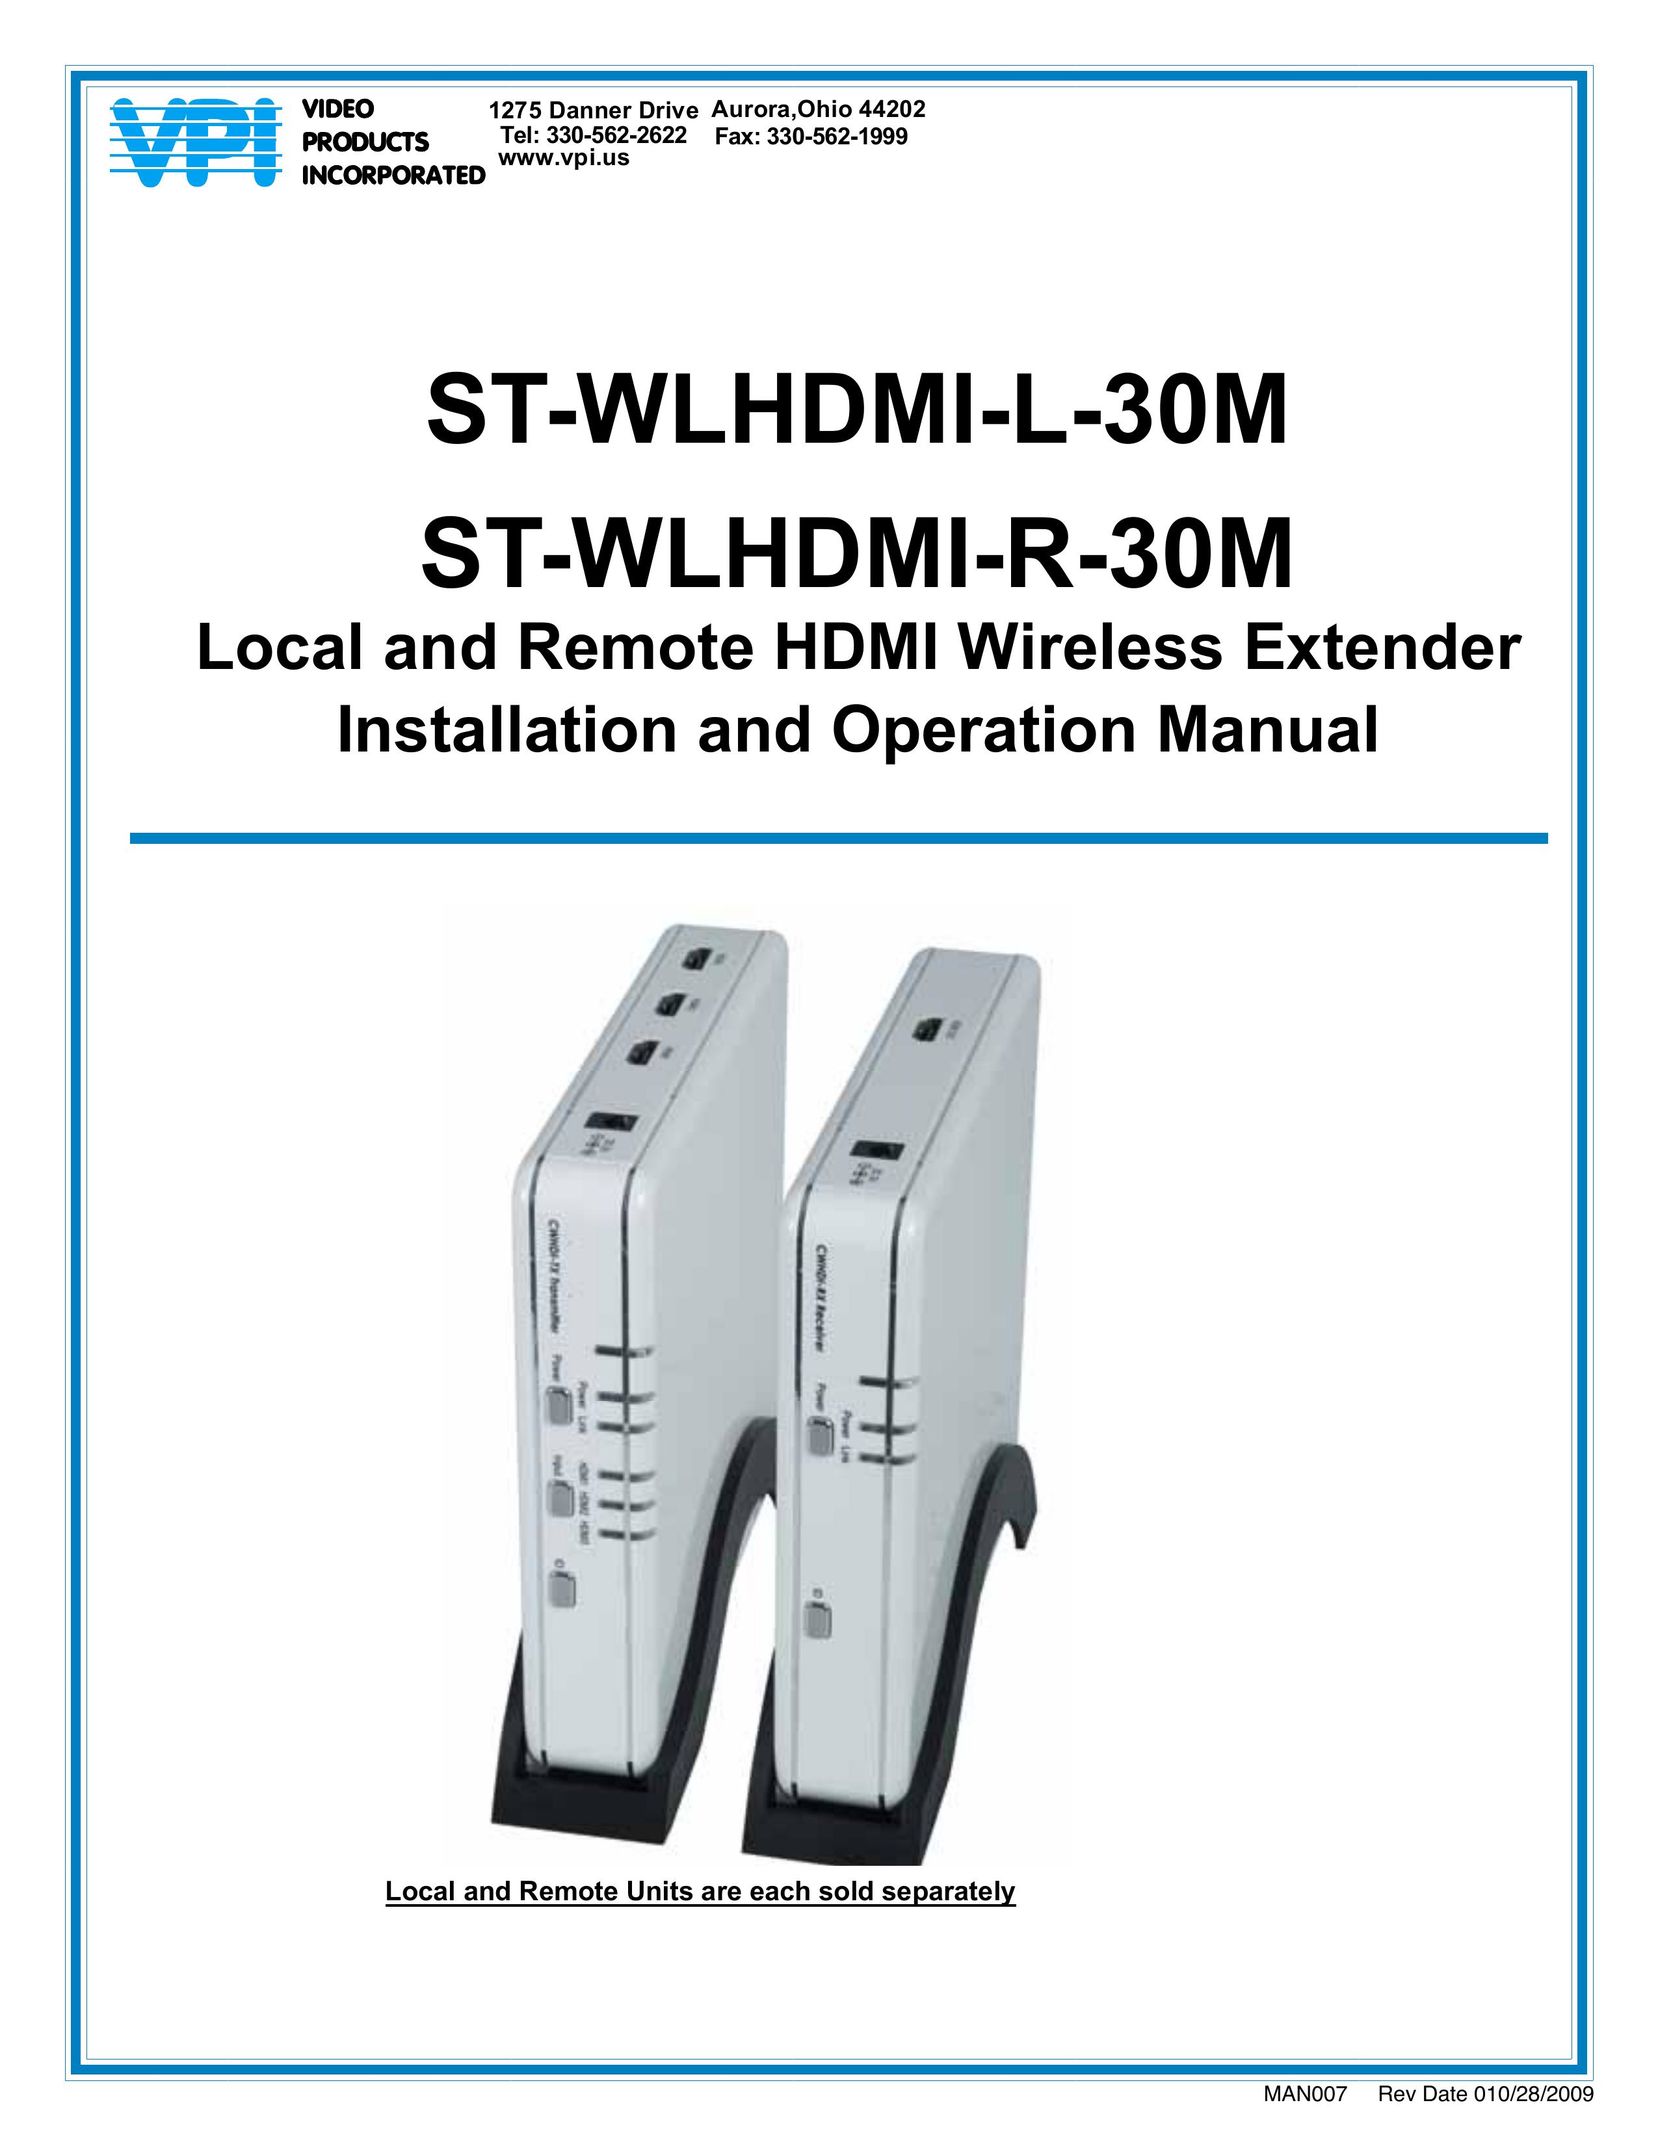 Video Products ST-WLHDMI-L-30M Computer Hardware User Manual